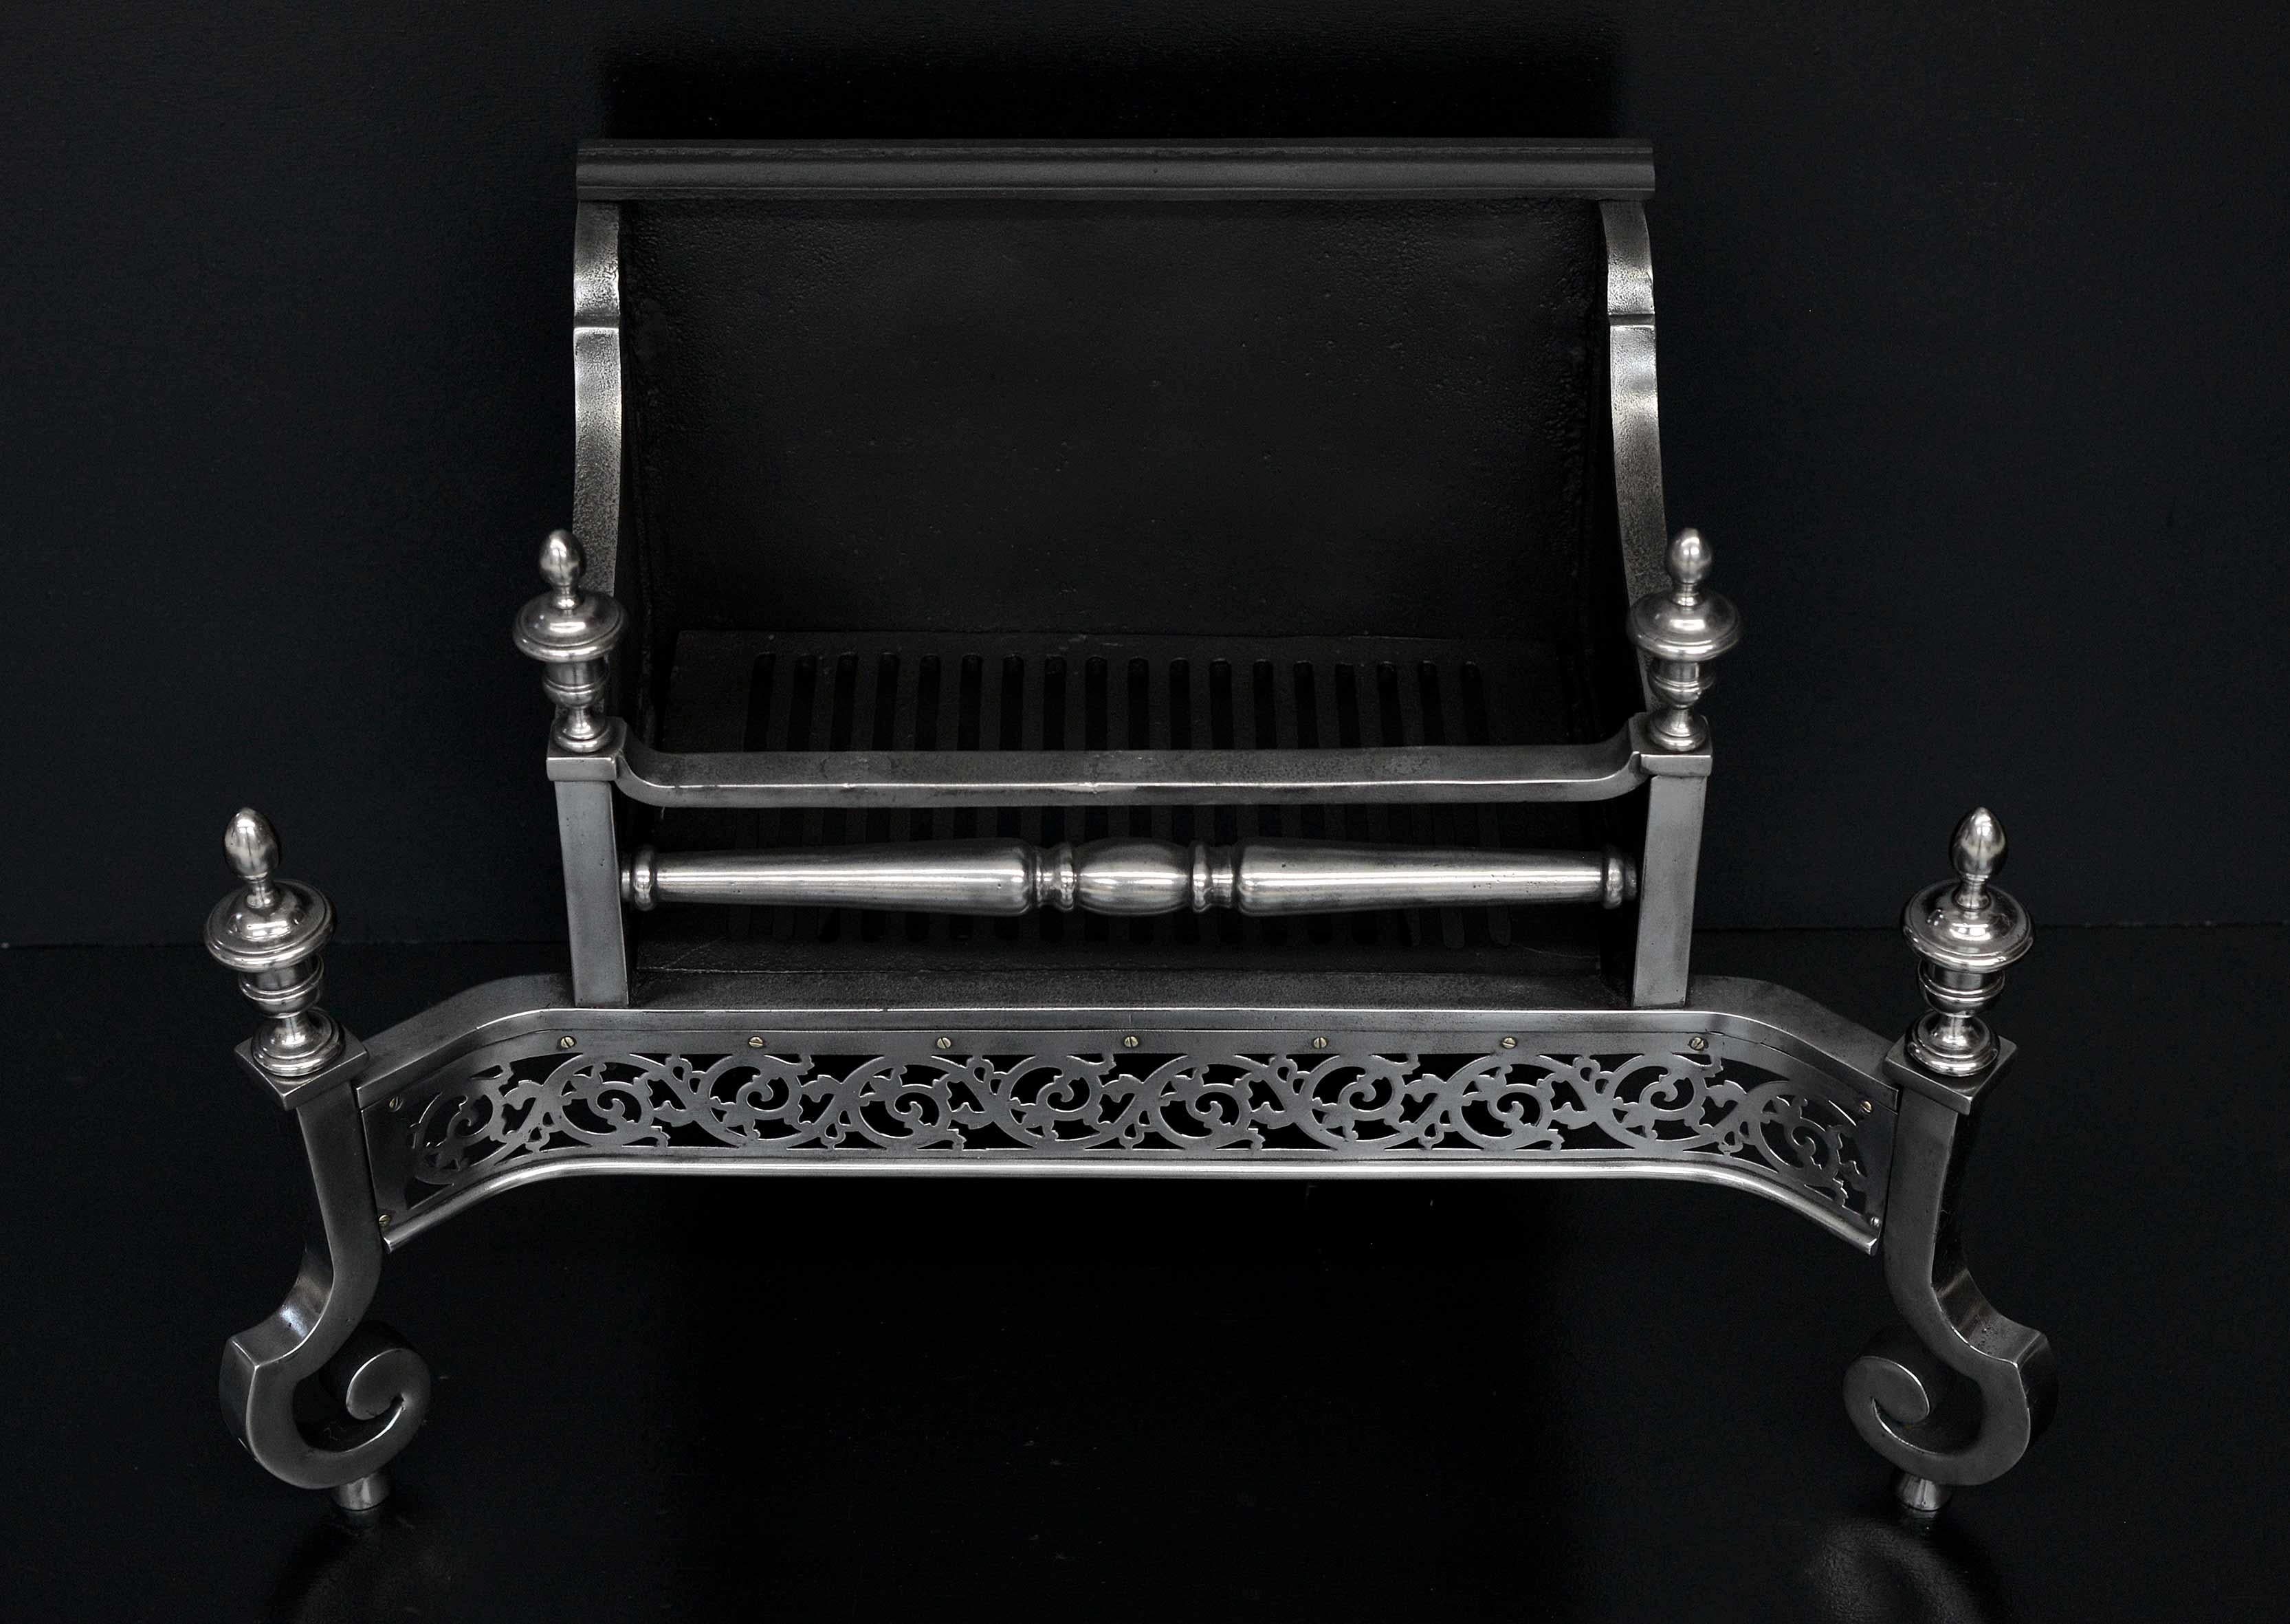 An English steel firegrate of Georgian form. The shaped legs surmounted by urn finials, the pierced fret with scrolled foliage throughout, with decorative cast front bar above. Cast iron fireback behind. Substantial burning area for a basket of